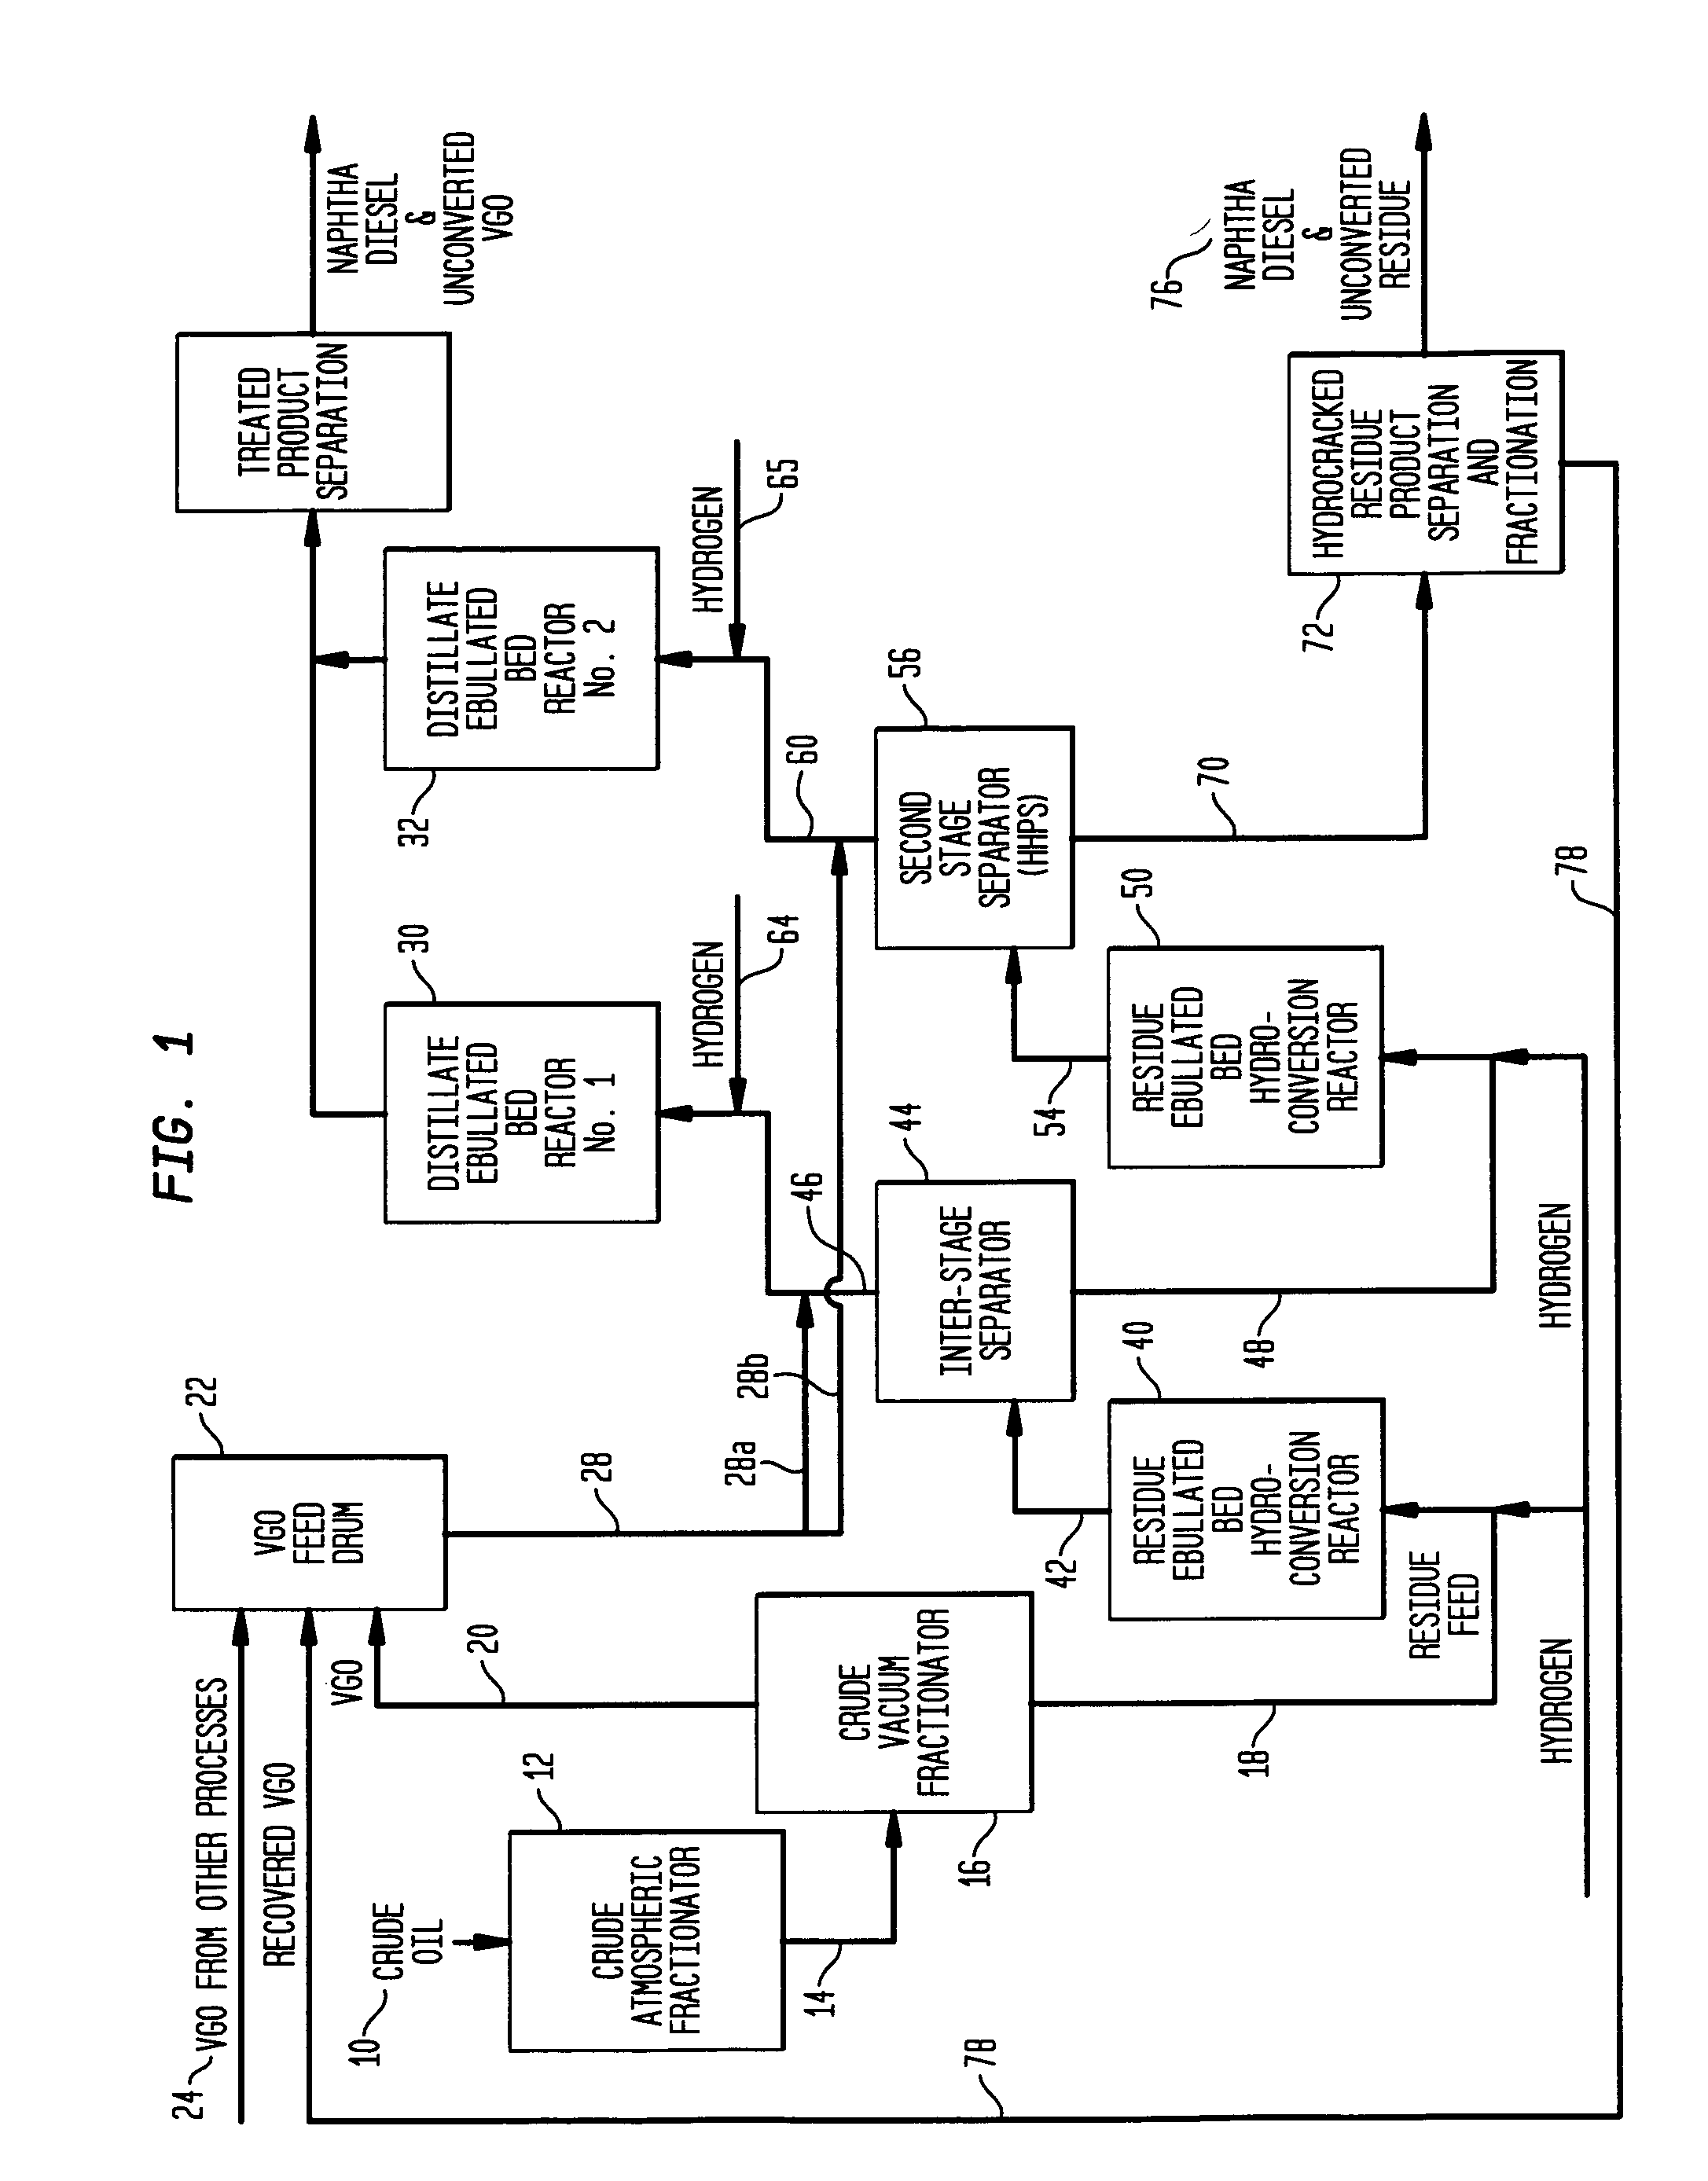 Process for multistage residue hydroconversion integrated with straight-run and conversion gasoils hydroconversion steps